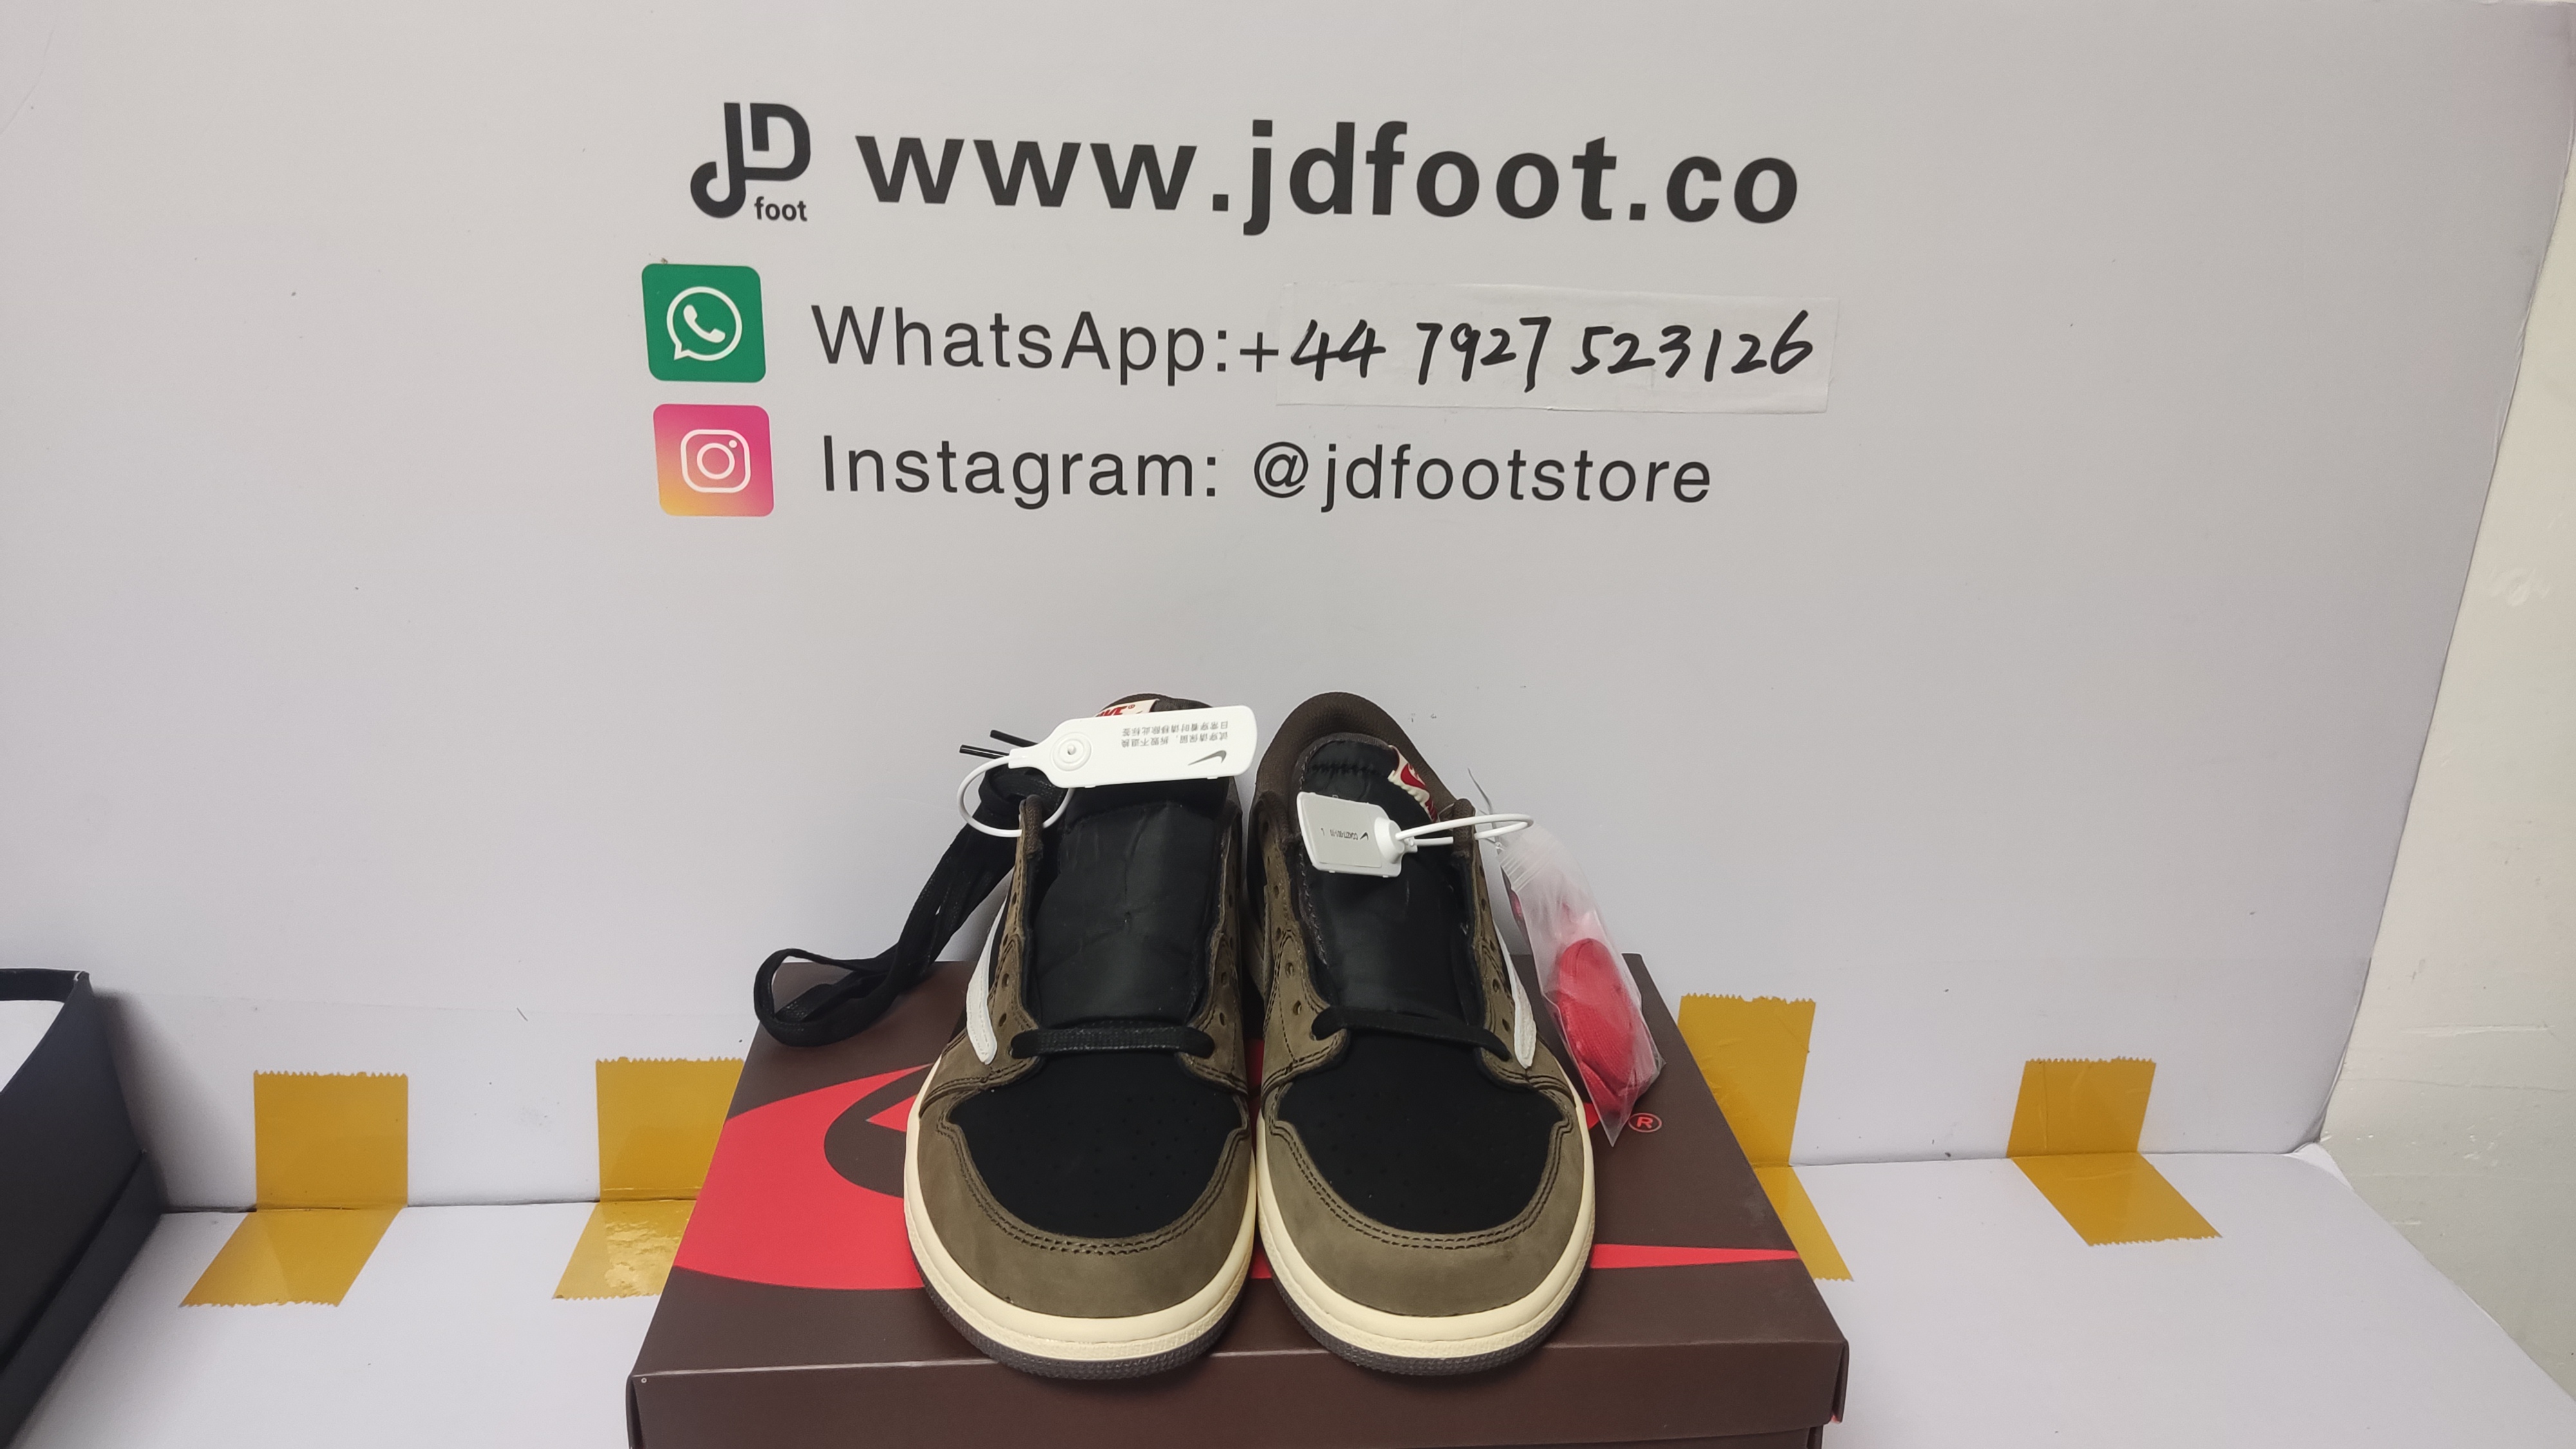 Jdfoot